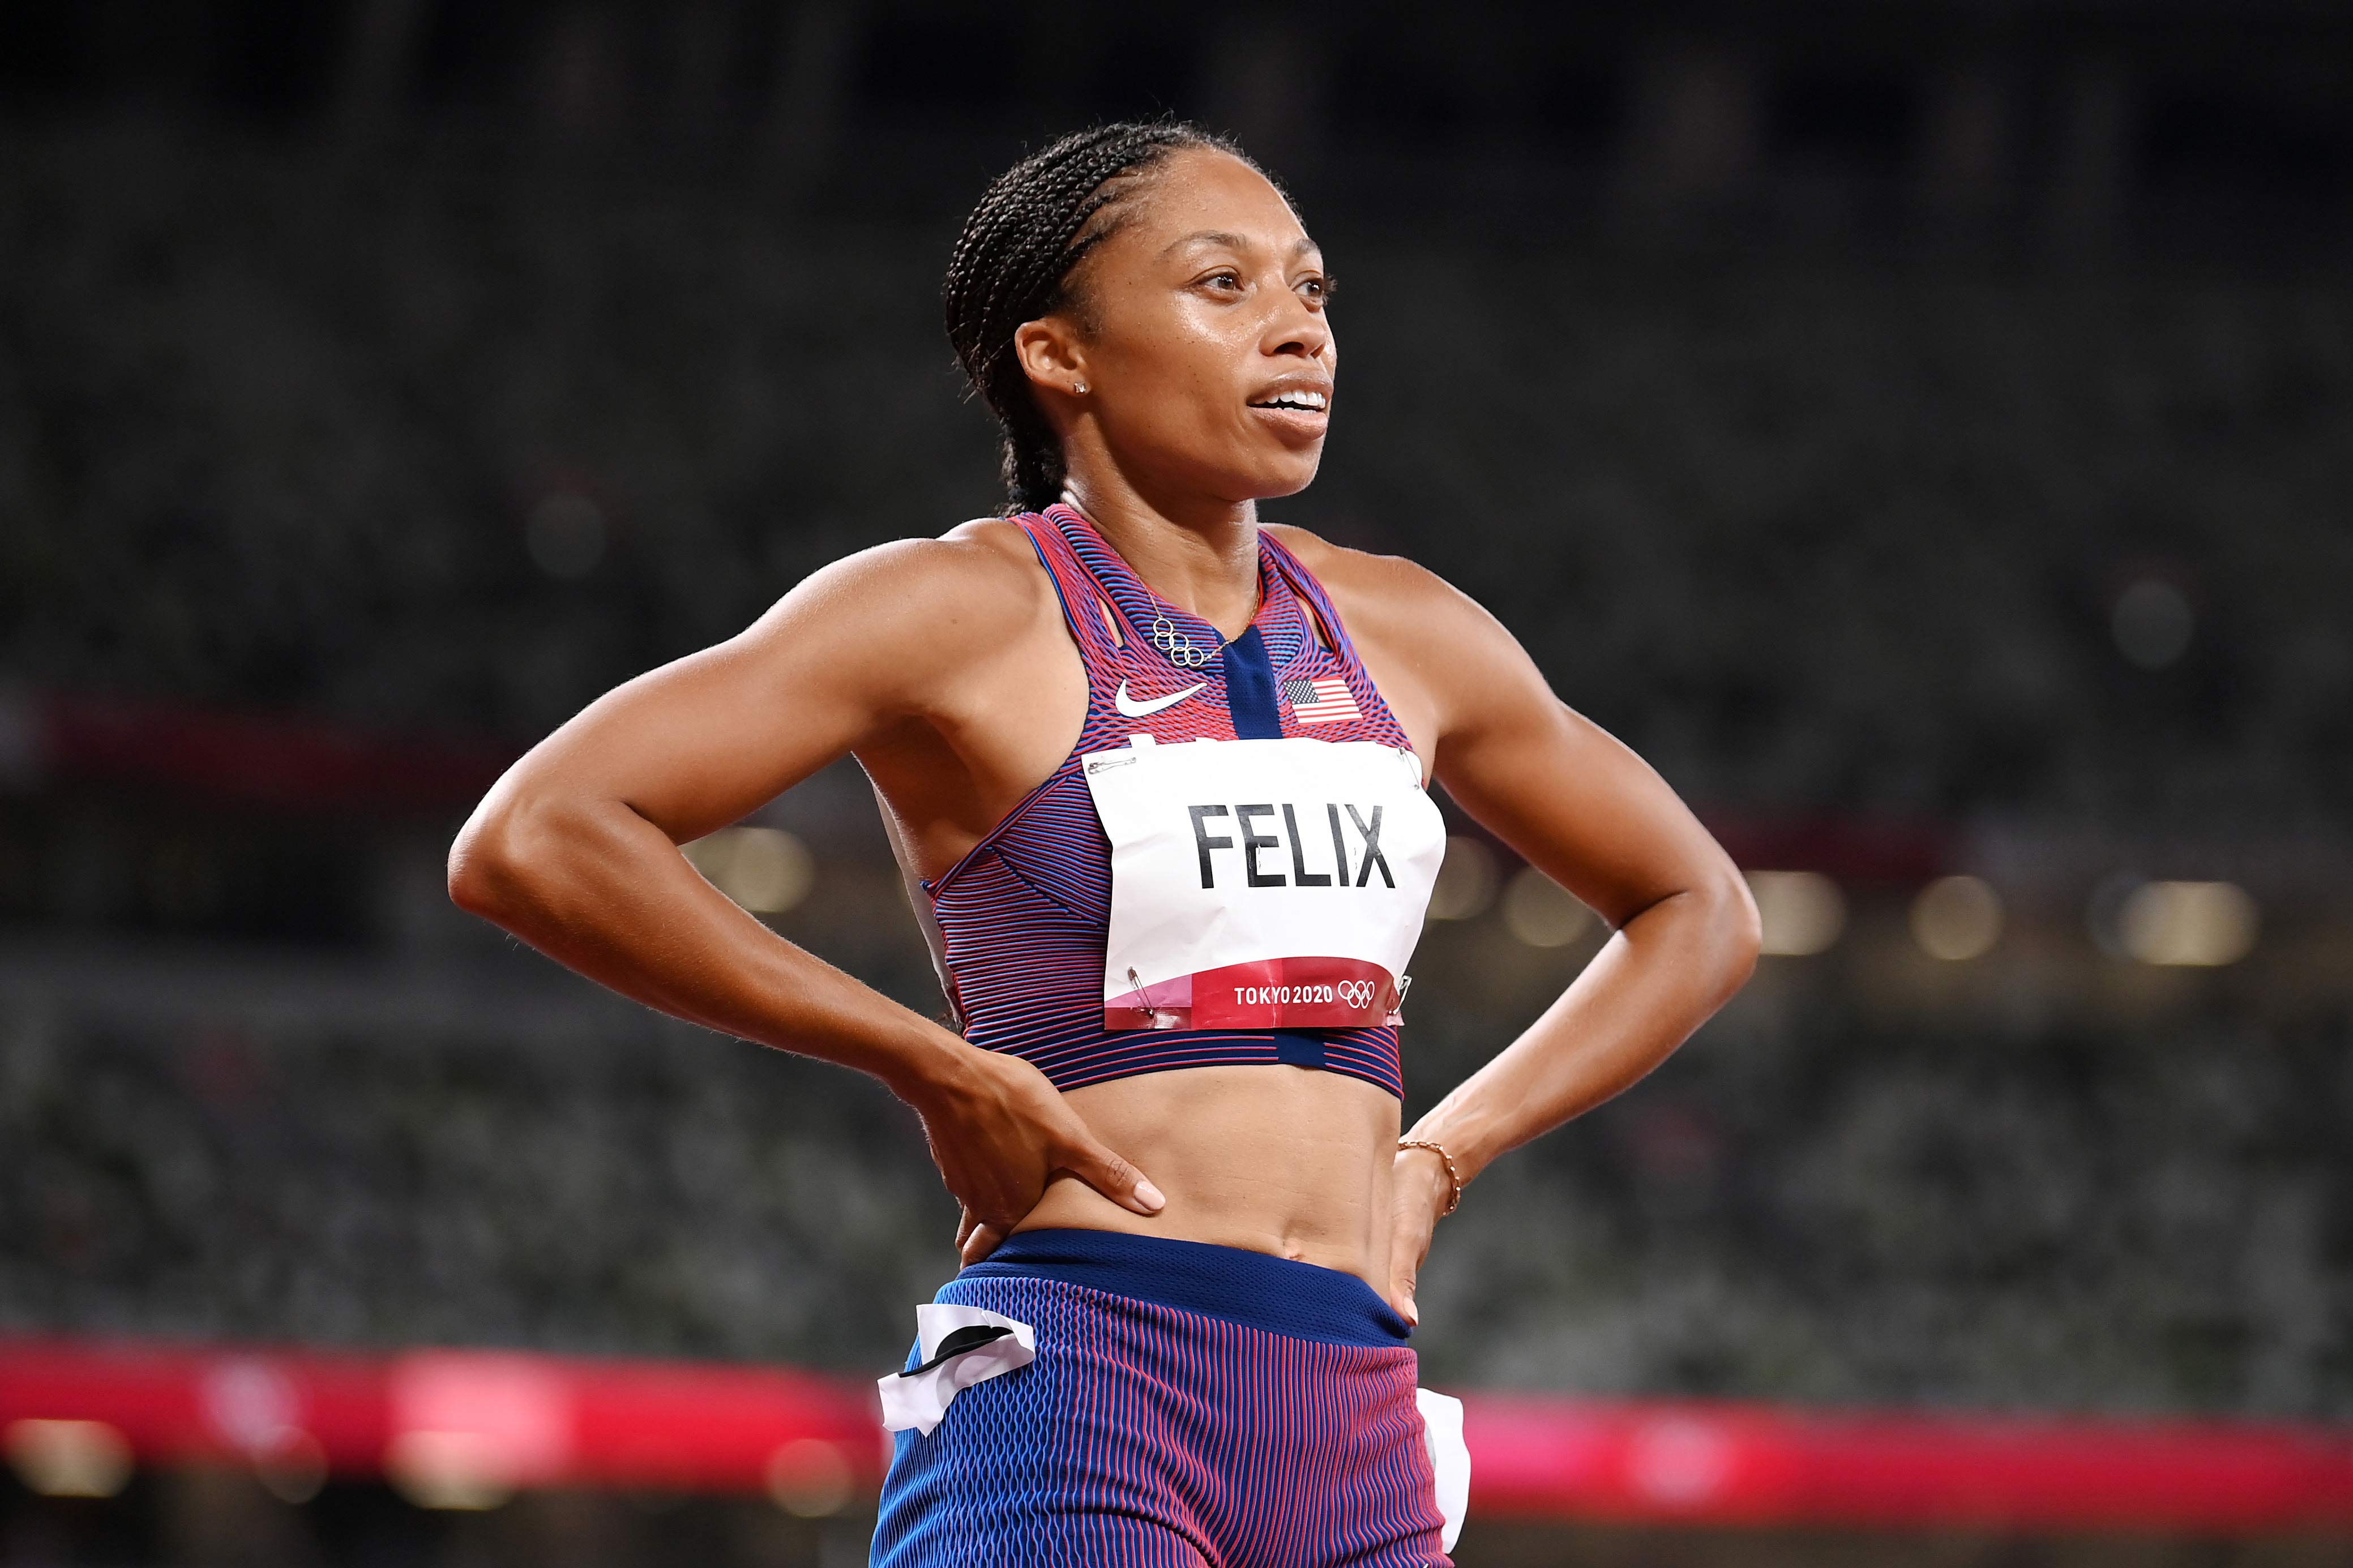 USA's Allyson Felix reacts after winning the bronze medal in the 400m on August 6.